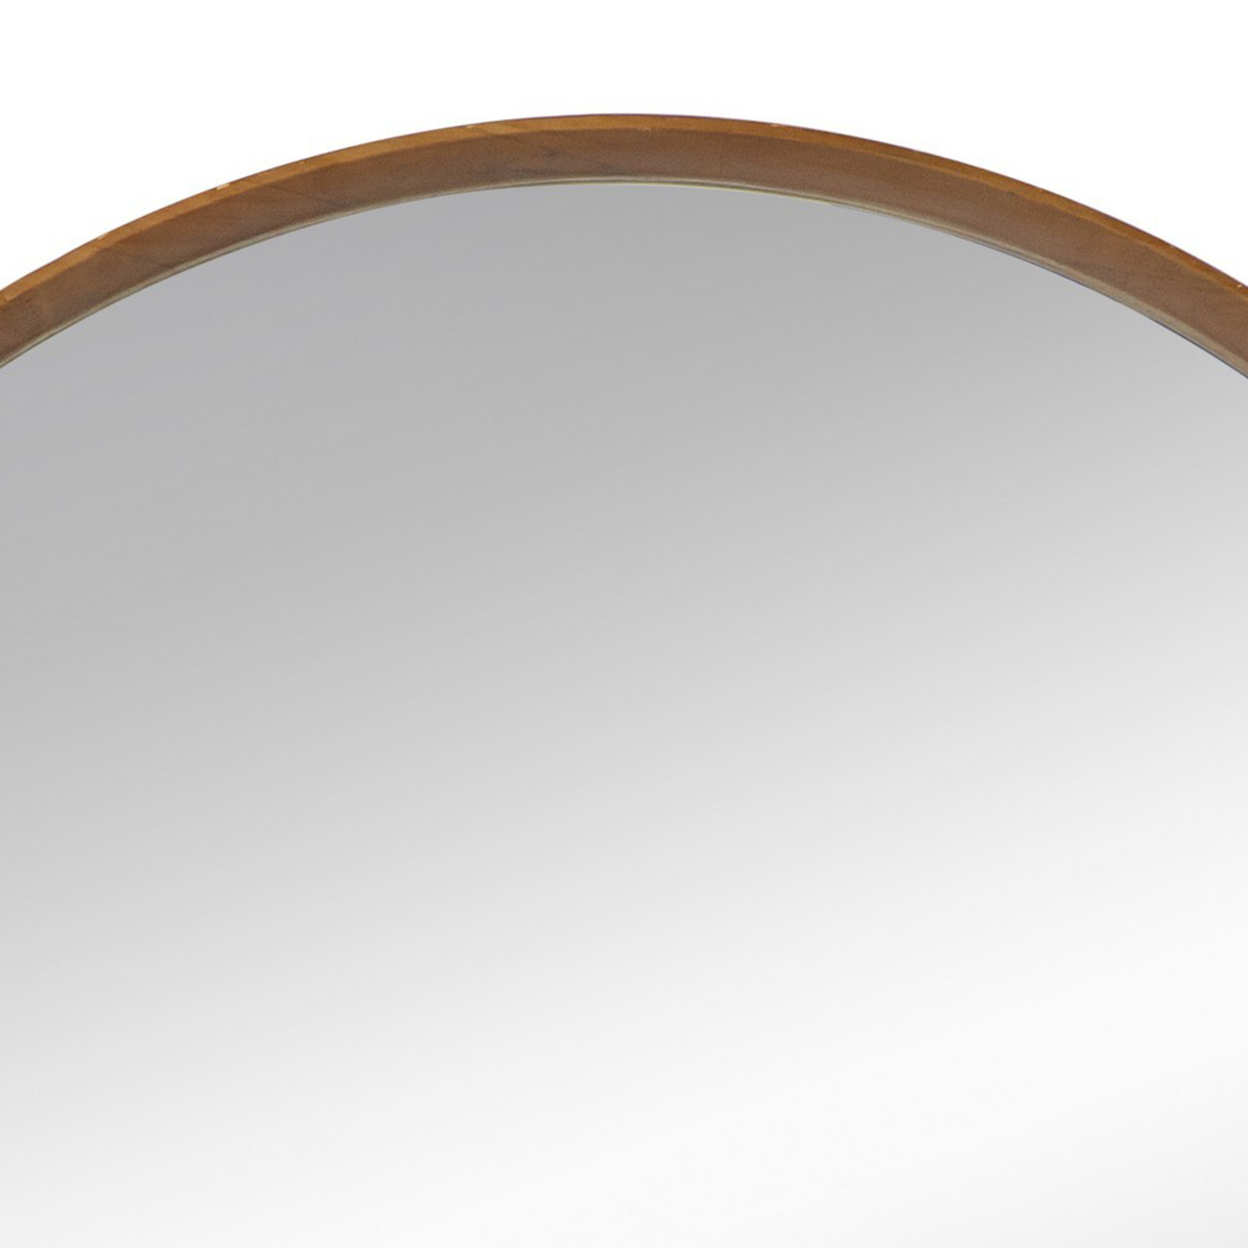 Roe 40 Inch Round Accent Mirror, Brown Pine Wood Frame, Wall Hung- Saltoro Sherpi